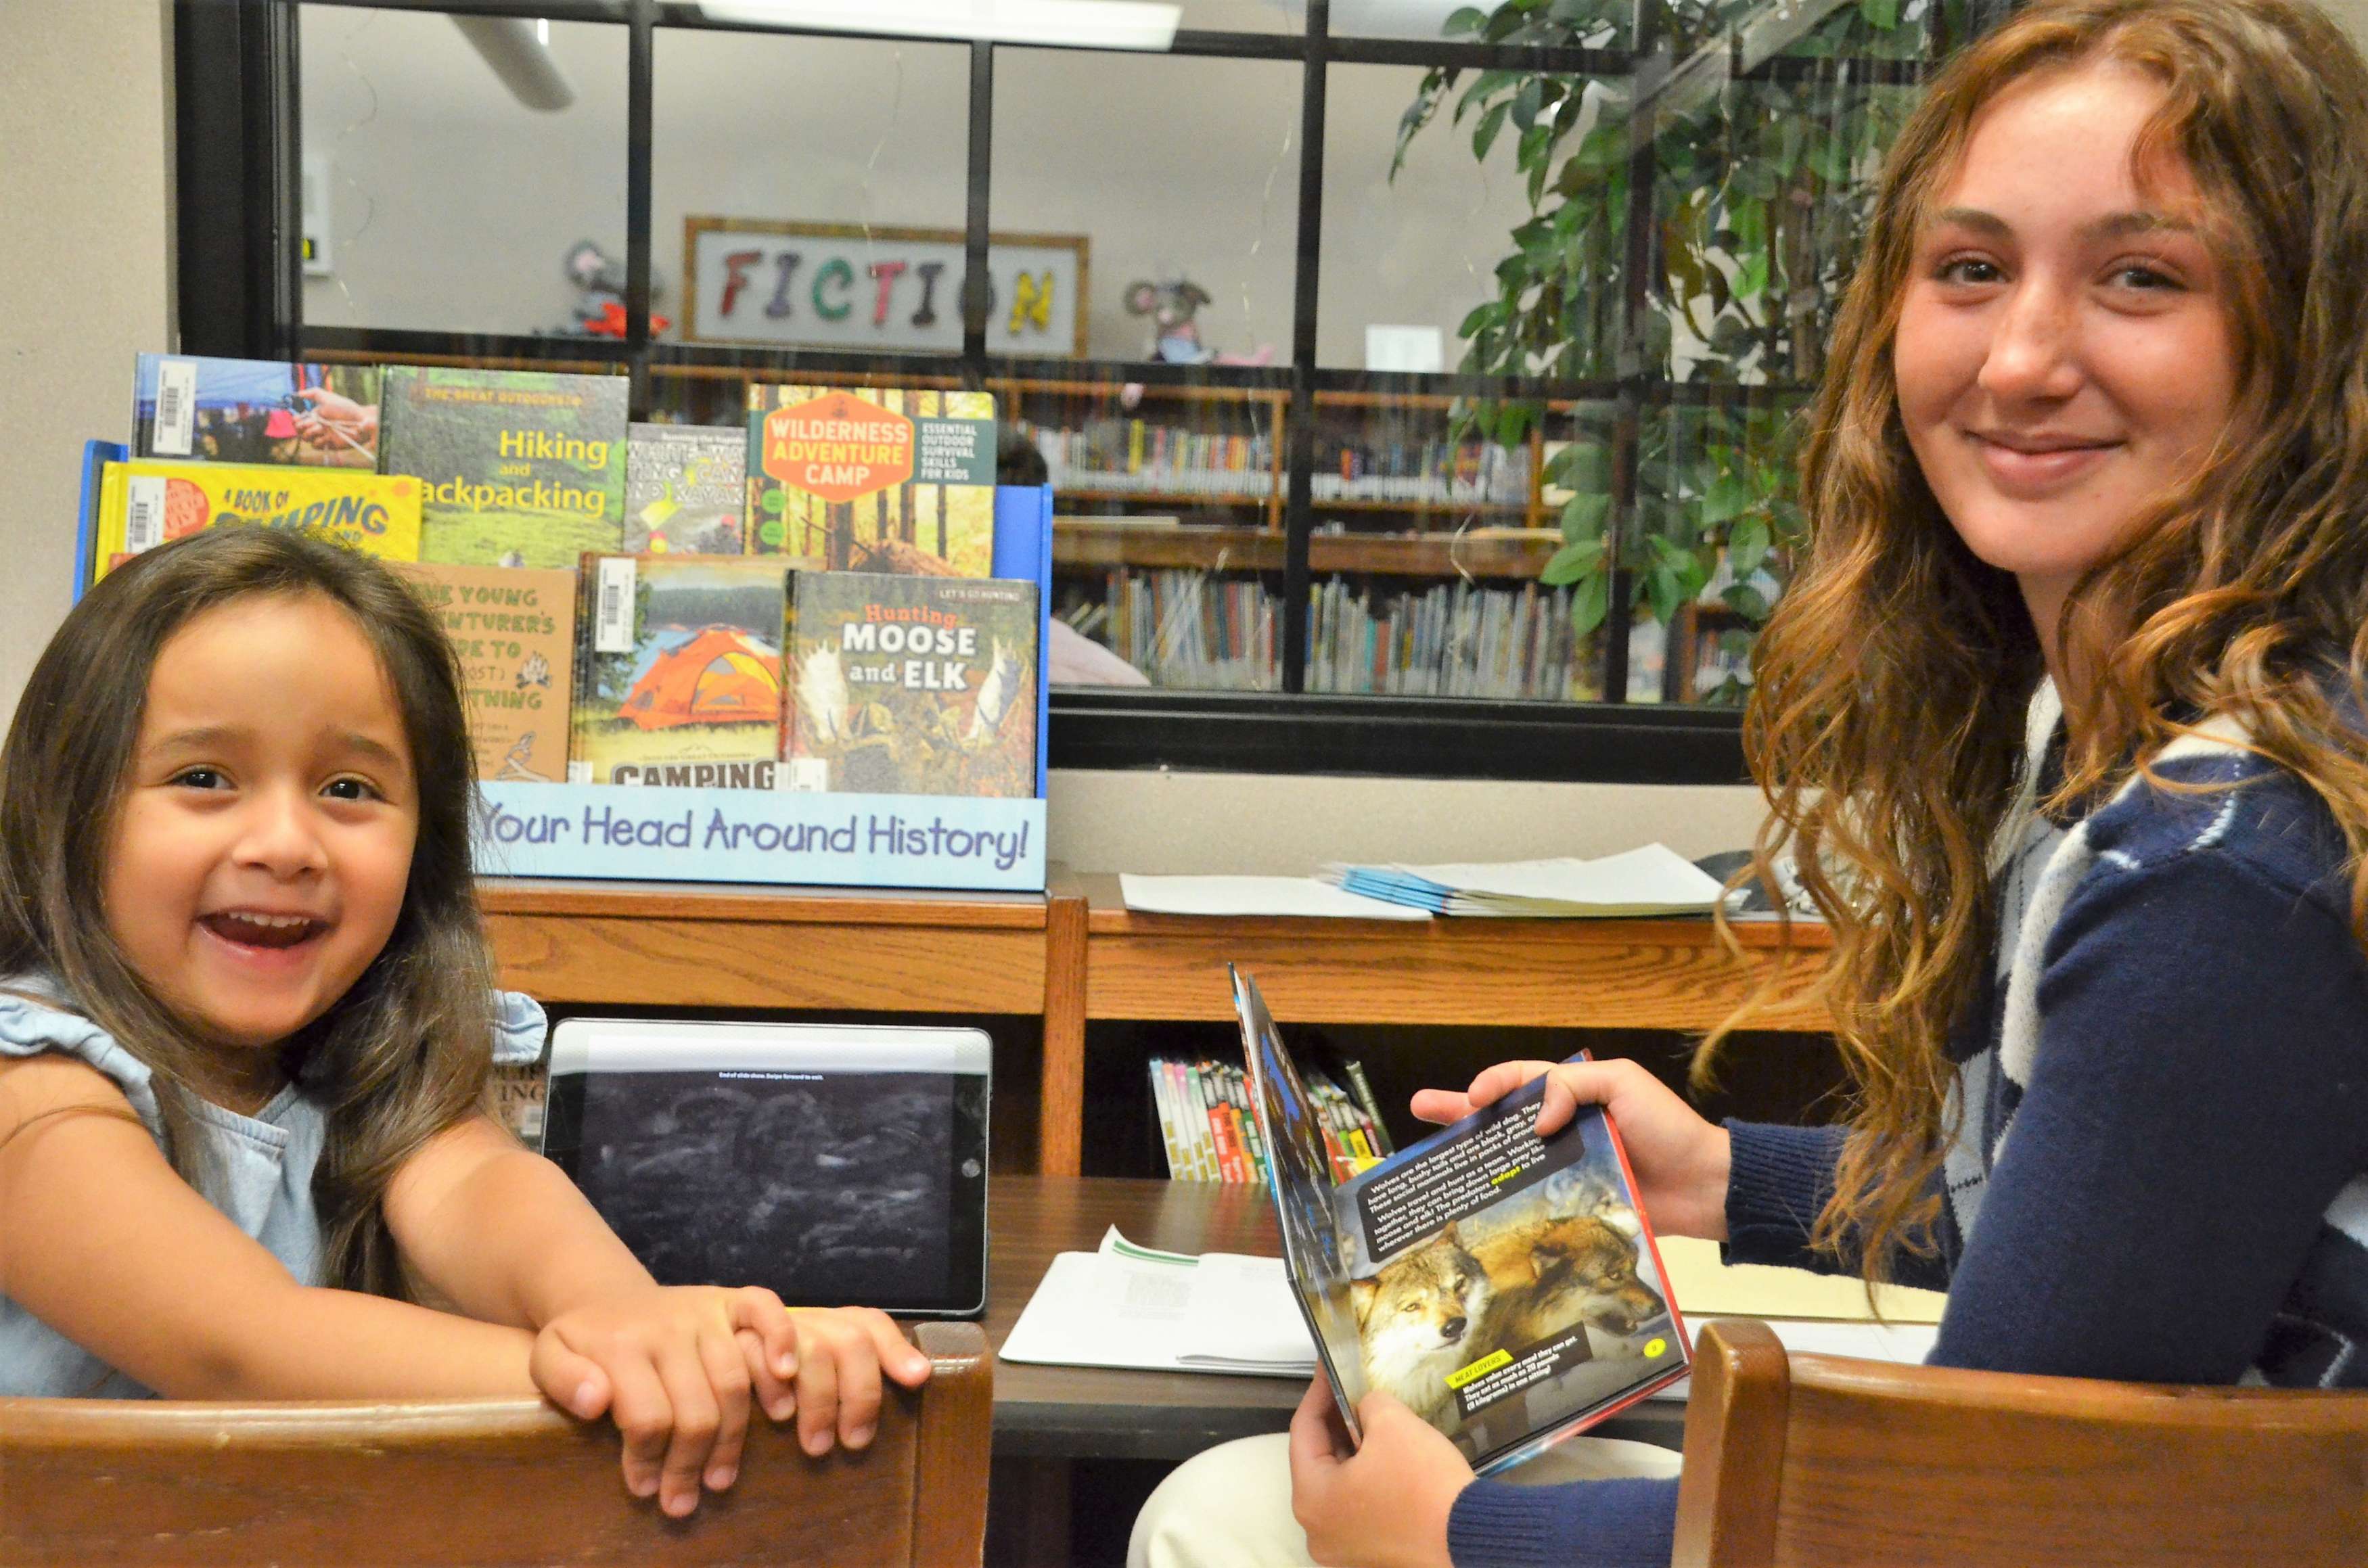 A young student and a volunteer smile at the camera while they read a picture book.